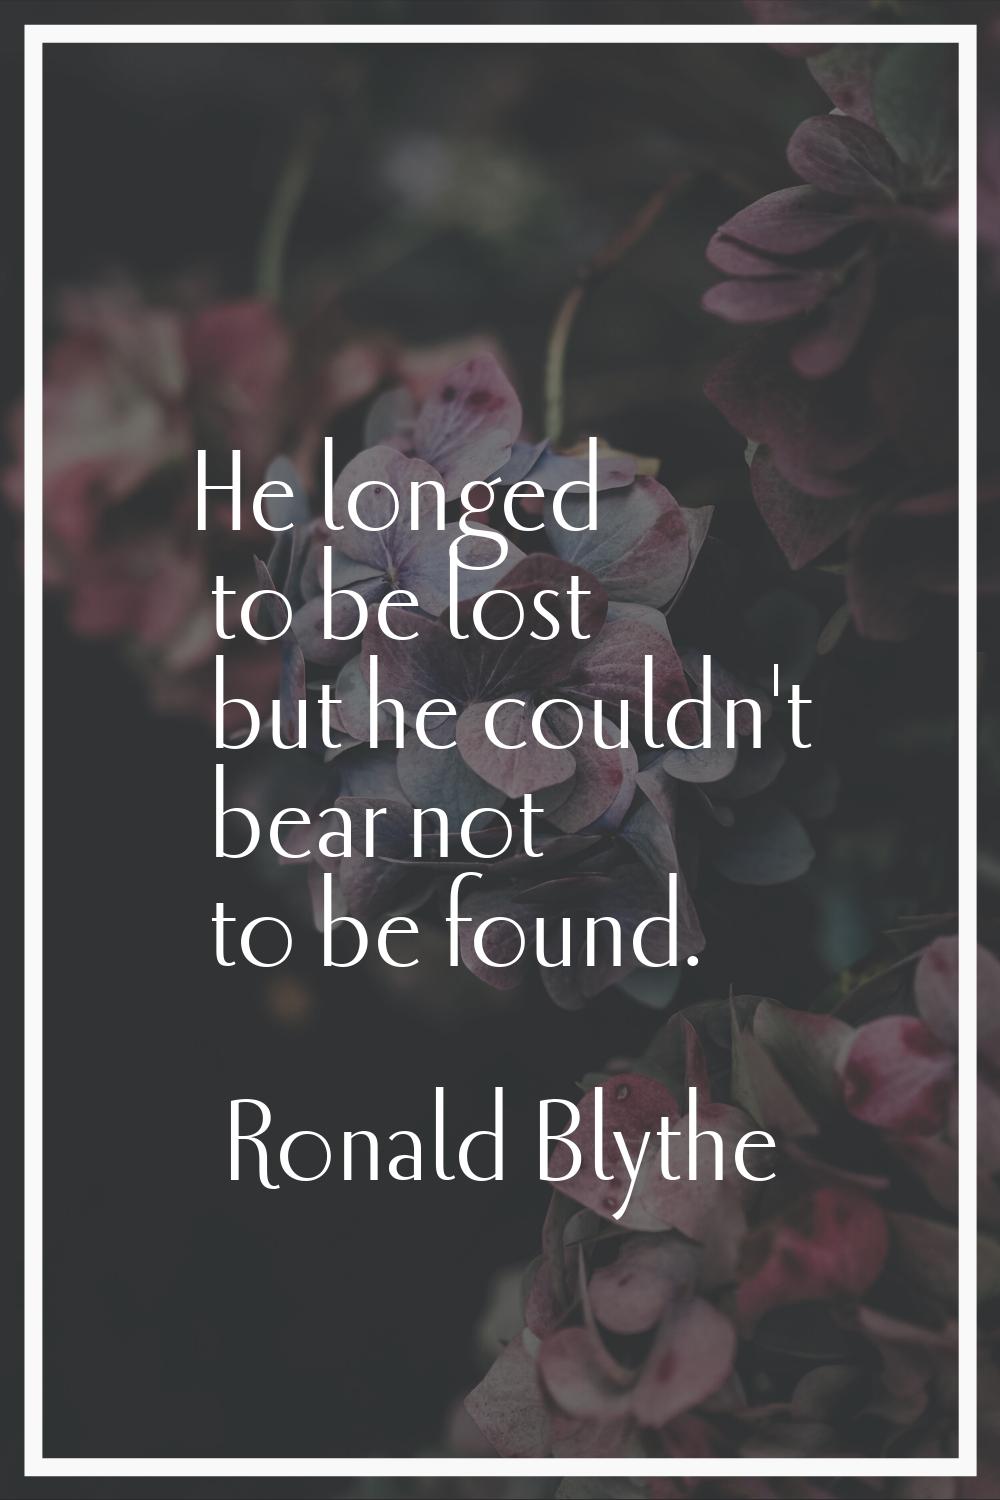 He longed to be lost but he couldn't bear not to be found.